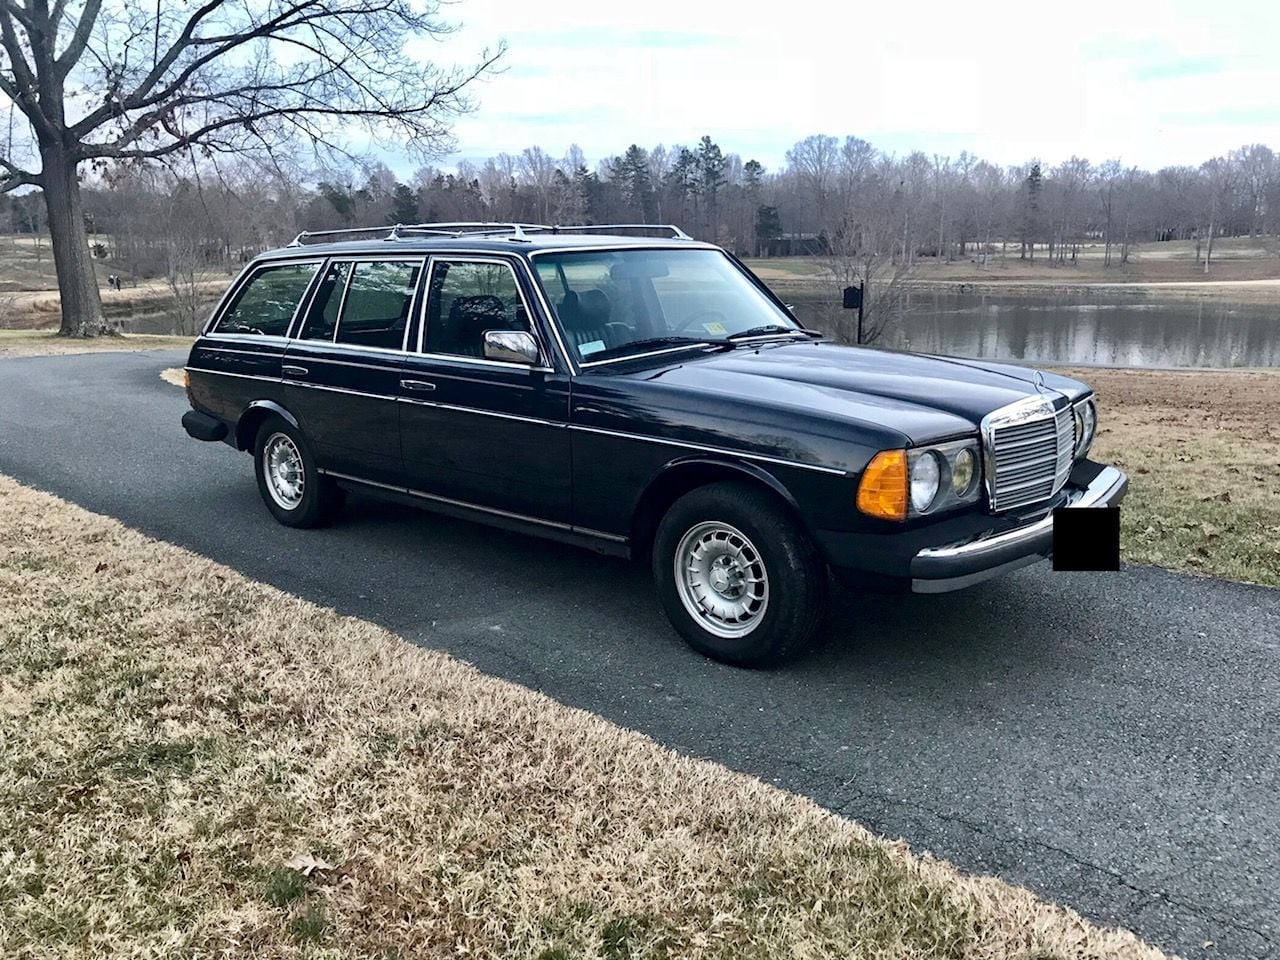 1985 Mercedes-Benz 300TD - 1985 Mercedes Benz 300TD, Great condition, Runs Well! - Used - VIN WRBAB93CXFF040373 - 240,000 Miles - 5 cyl - 2WD - Automatic - Wagon - Blue - Charlottesville, VA 22901, United States